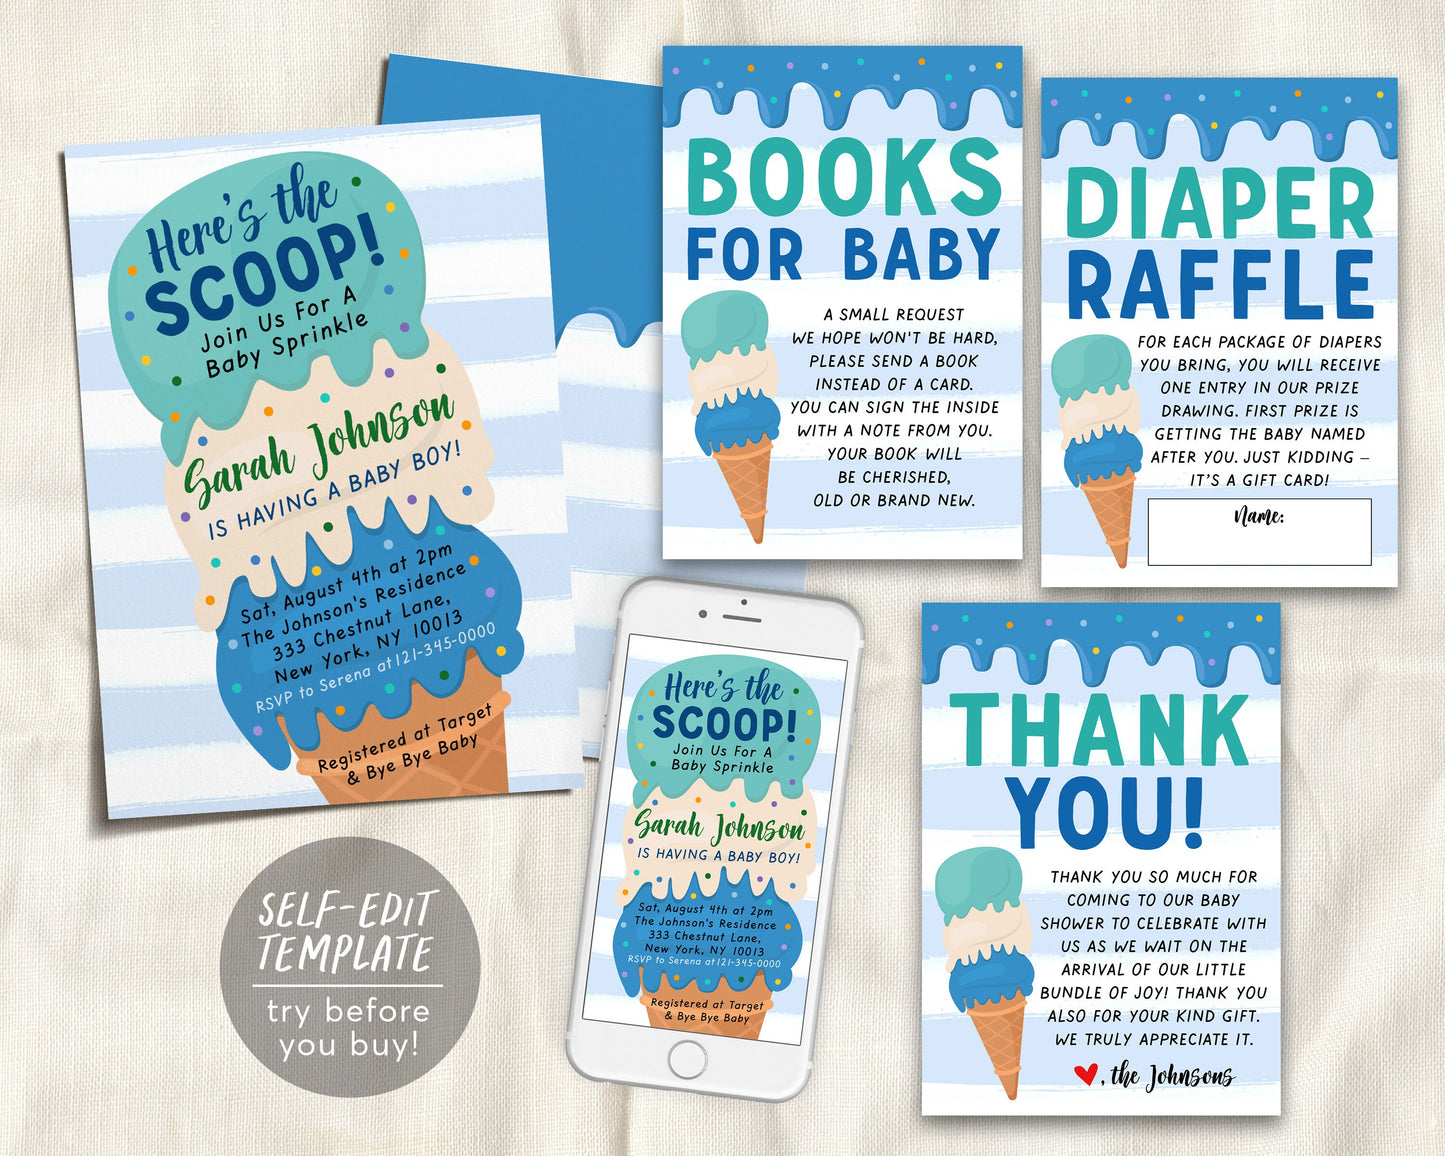 Ice Cream BOY Baby Shower Invitation BUNDLE Suite Set Editable Template, Here's the Scoop Baby Sprinkle Invite, Book Request Diaper Raffle